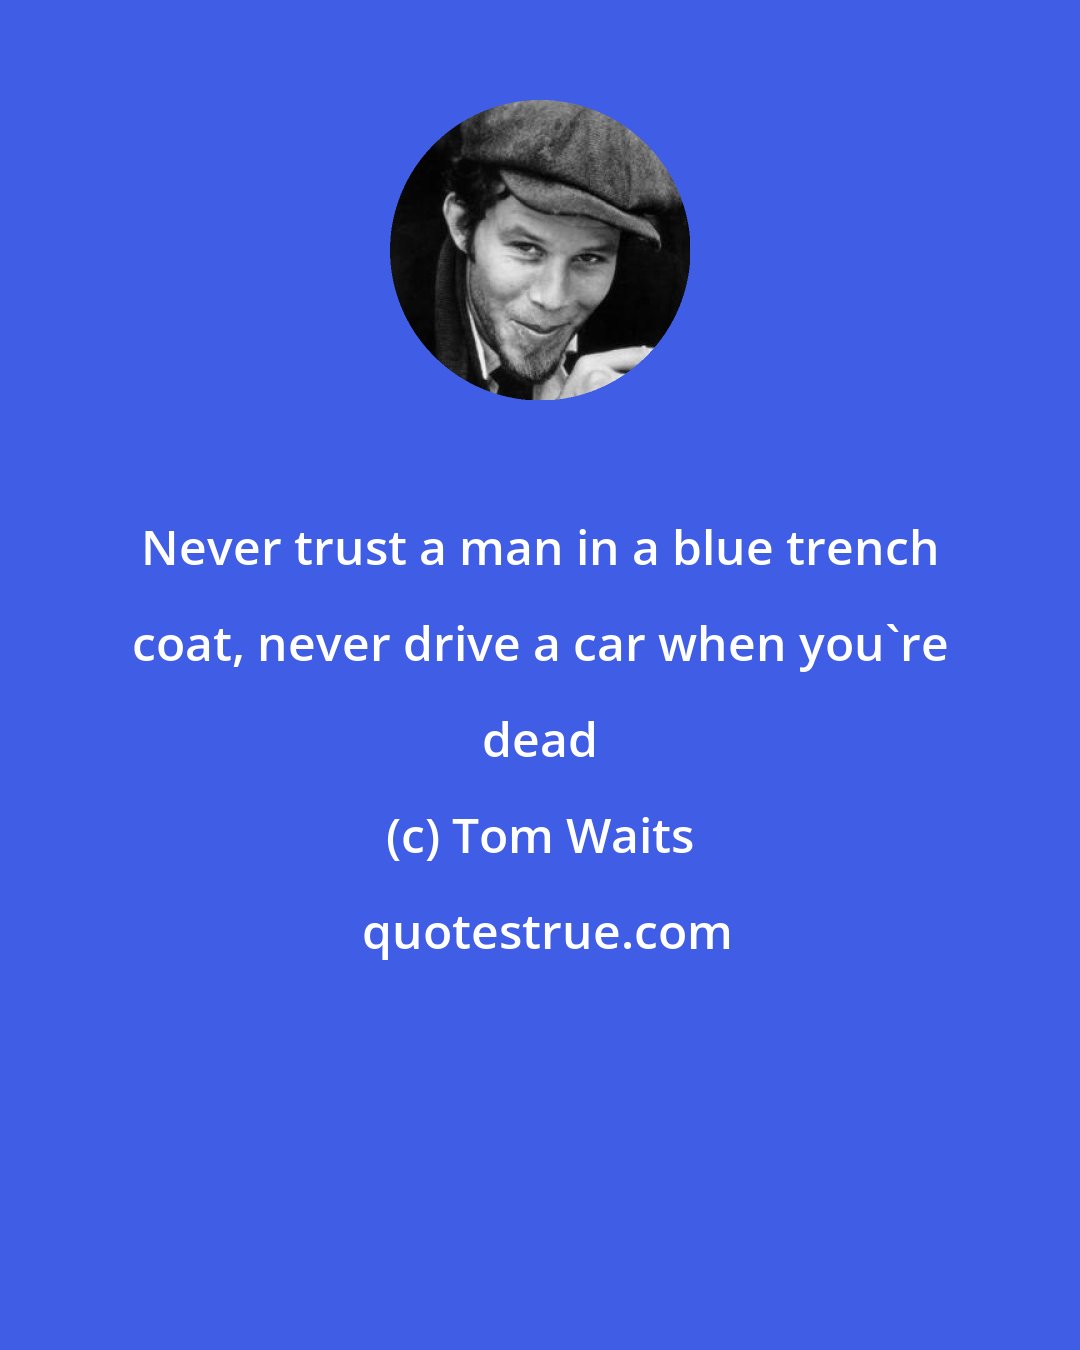 Tom Waits: Never trust a man in a blue trench coat, never drive a car when you're dead